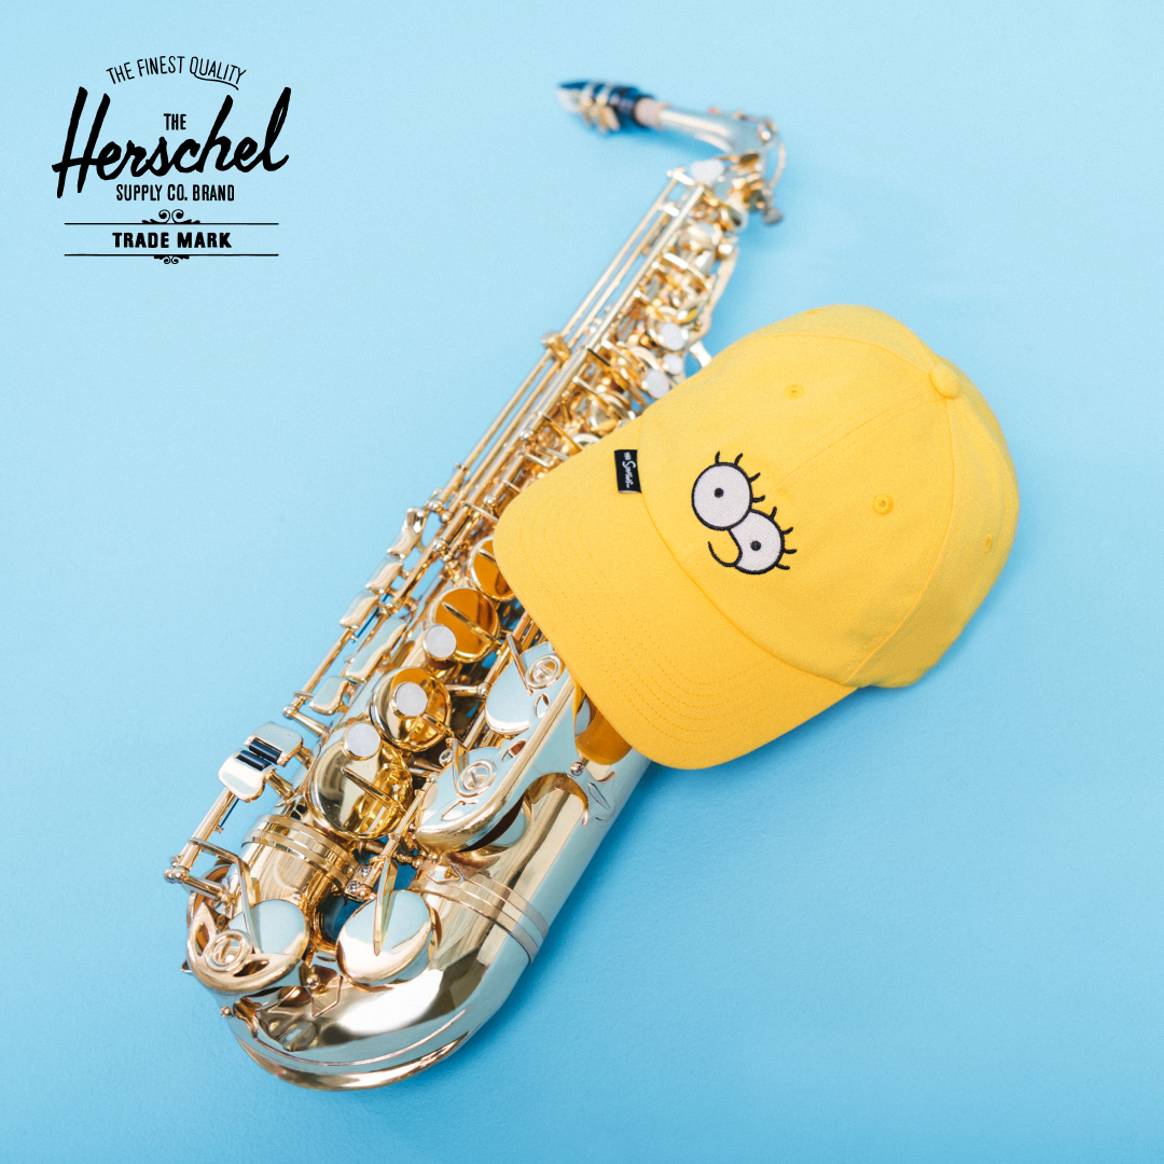 Herschel Supply and The Simpsons, courtesy of the brand